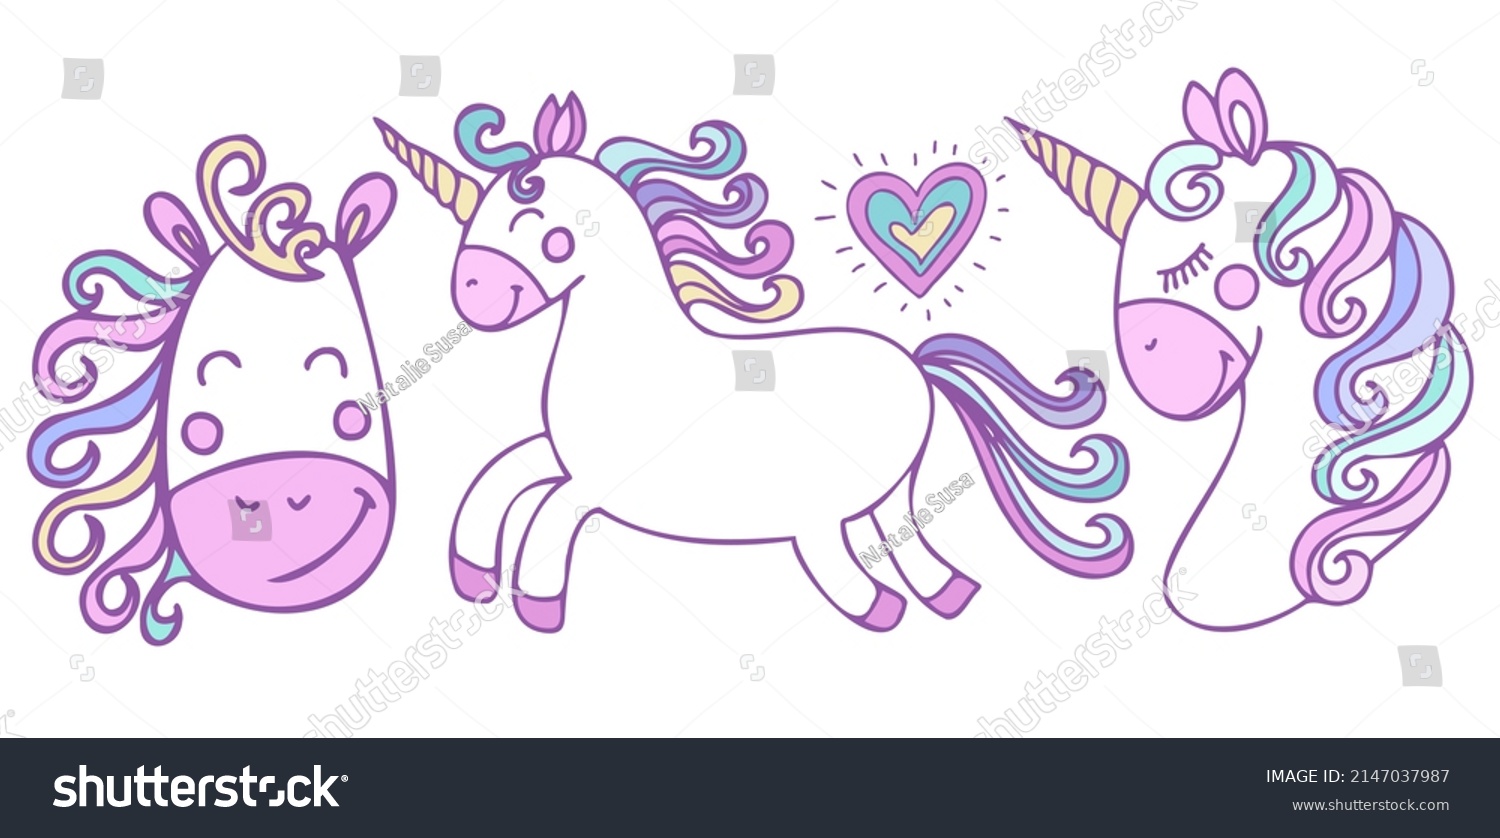 SVG of Cute unicorn and unicorn head with colorful mane.Cartoon style vector illustration isolated on white background.
Suitable for nursery and post card design and svg for cricut svg